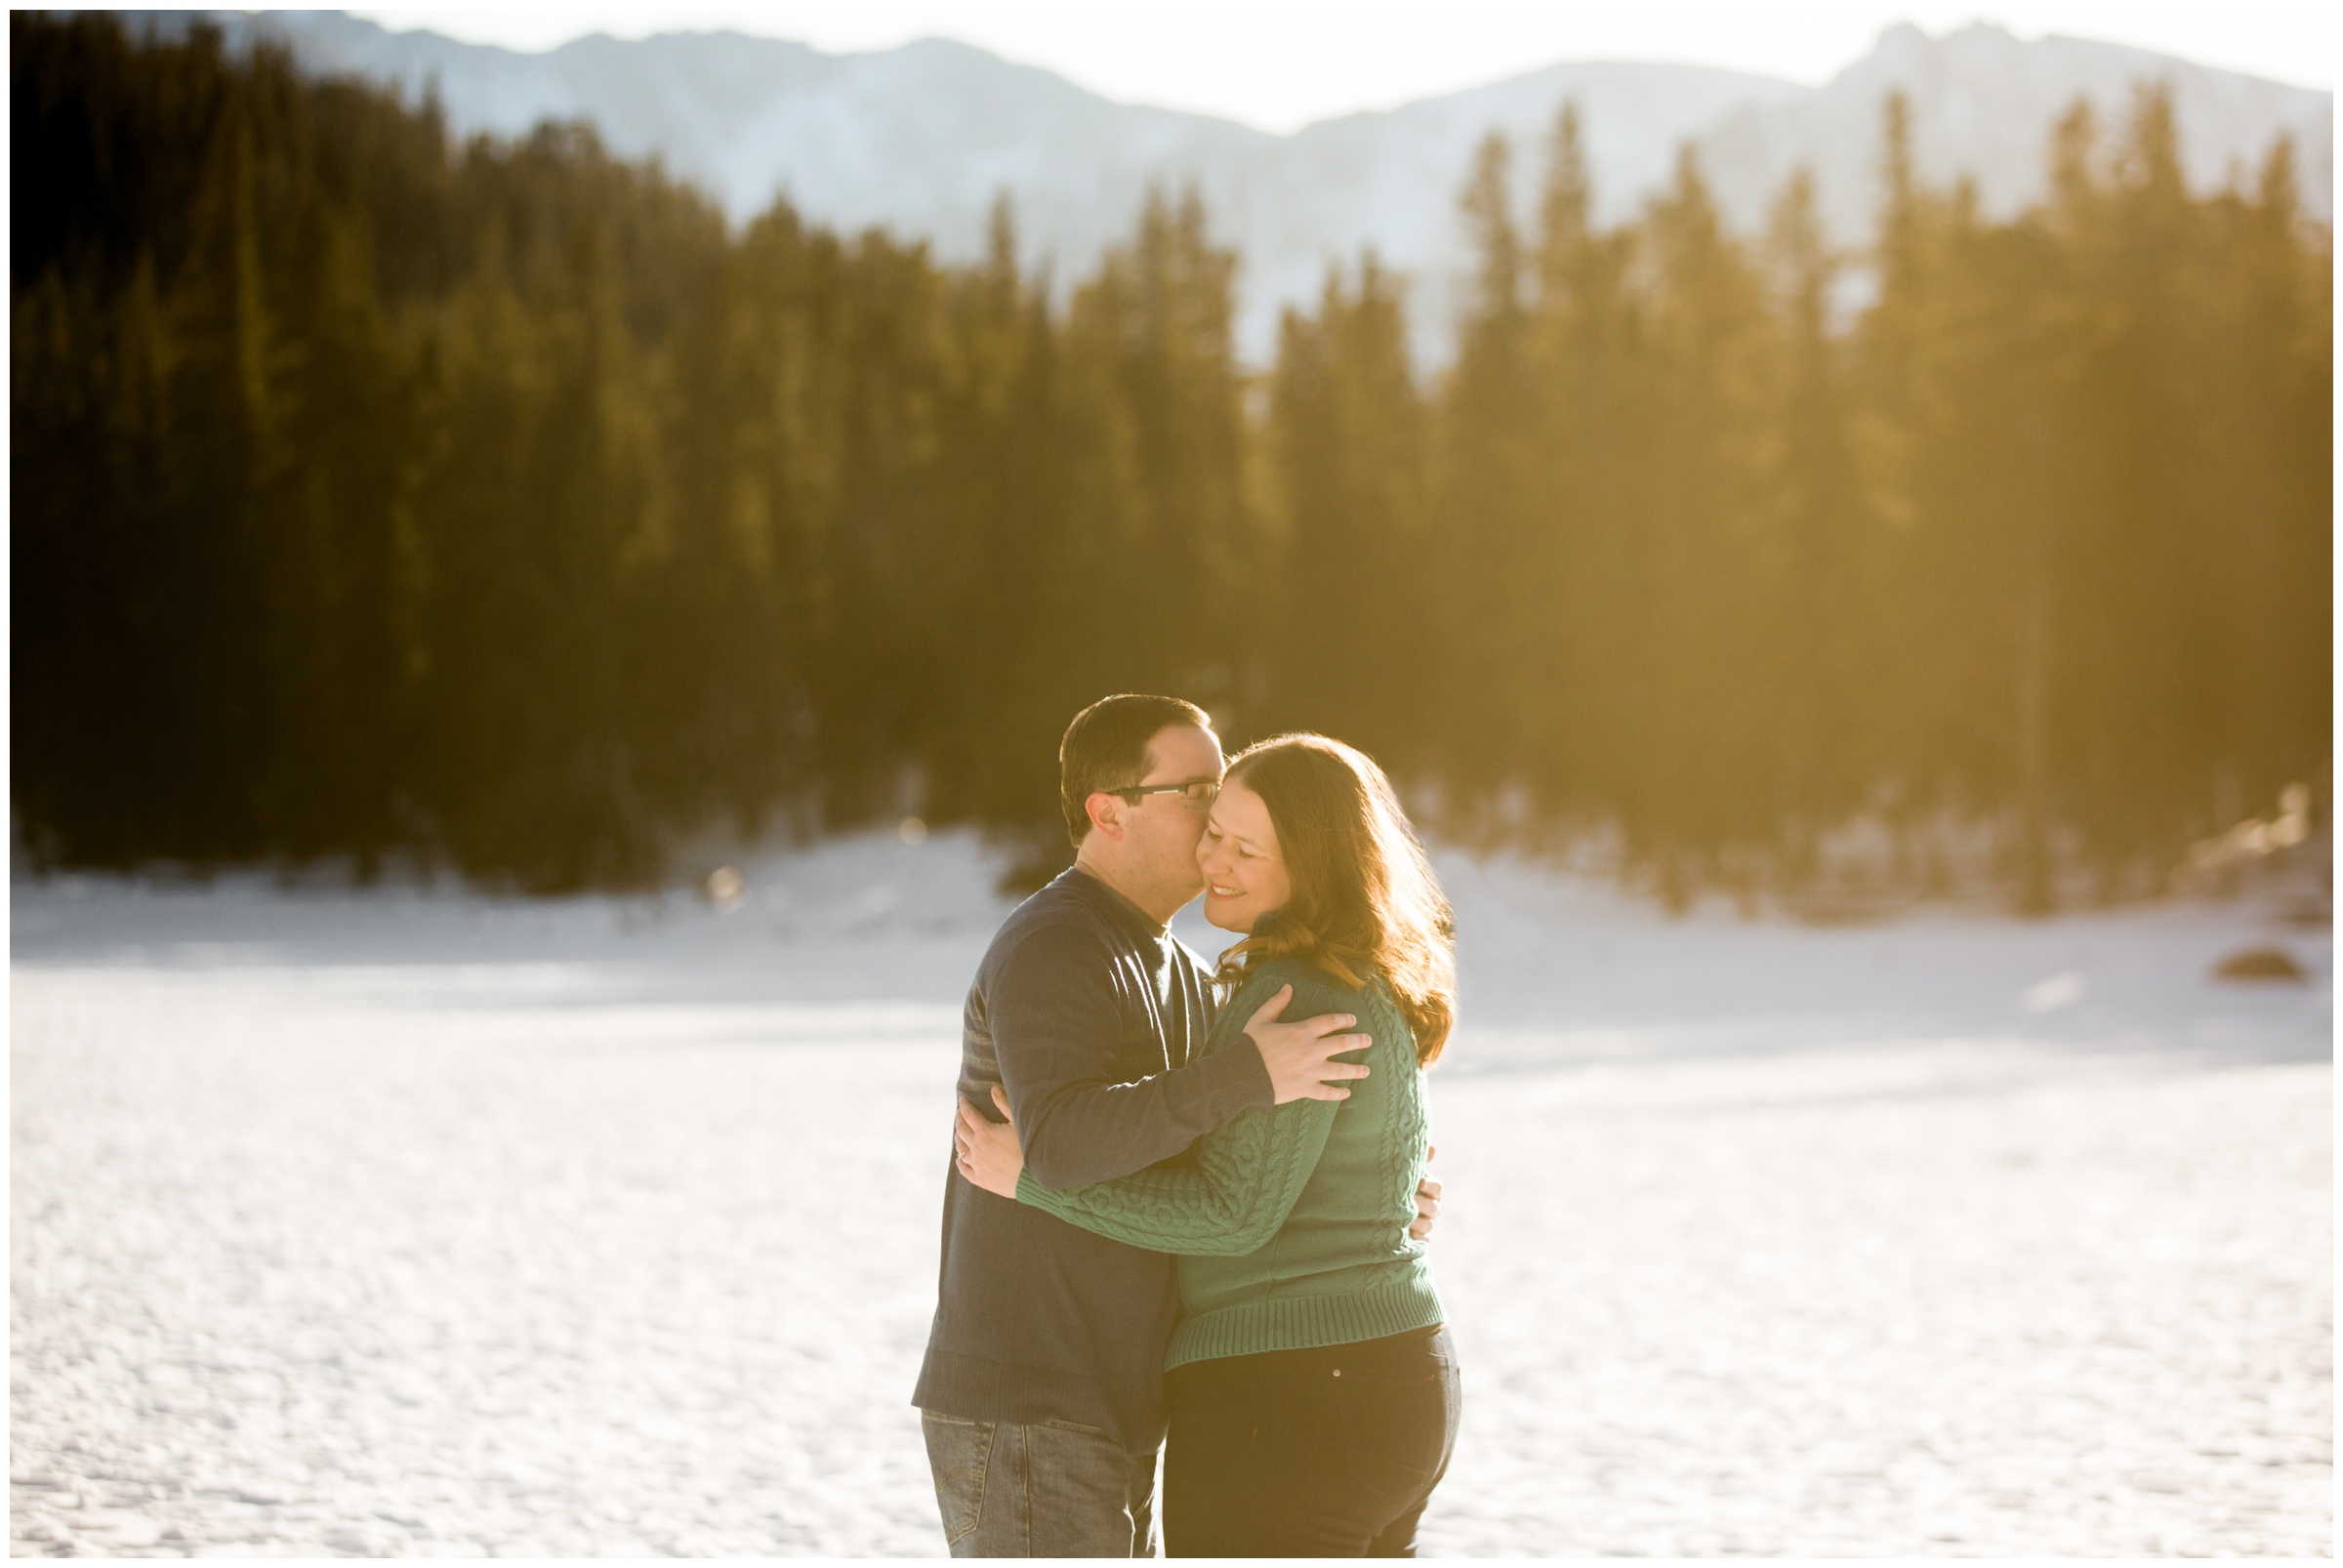 Echo Lake engagement photos during winter by Colorado mountain wedding photographer Plum Pretty Photography